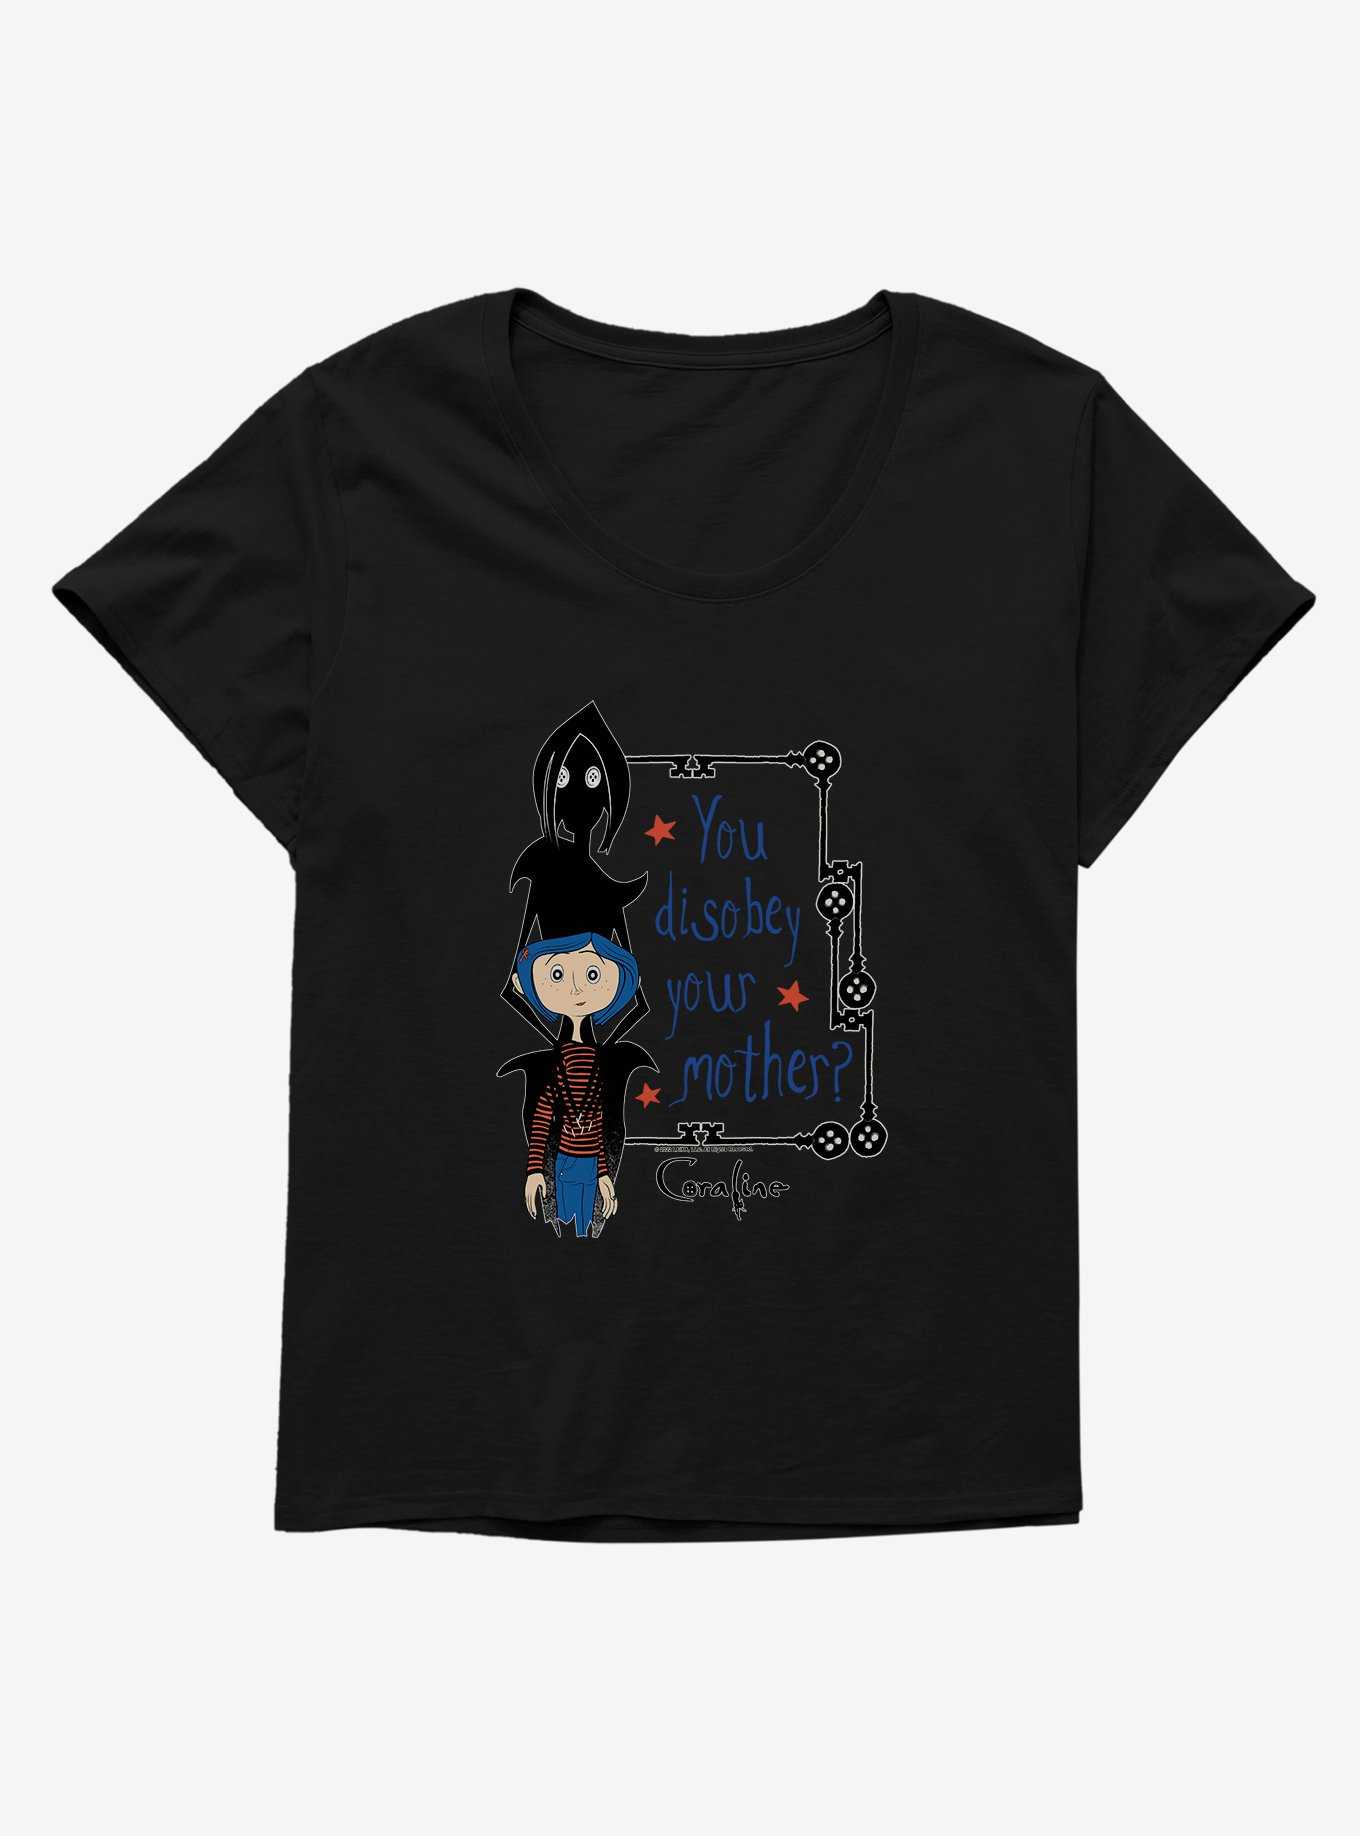 Coraline Disobey Mother Womens T-Shirt Plus Size, , hi-res